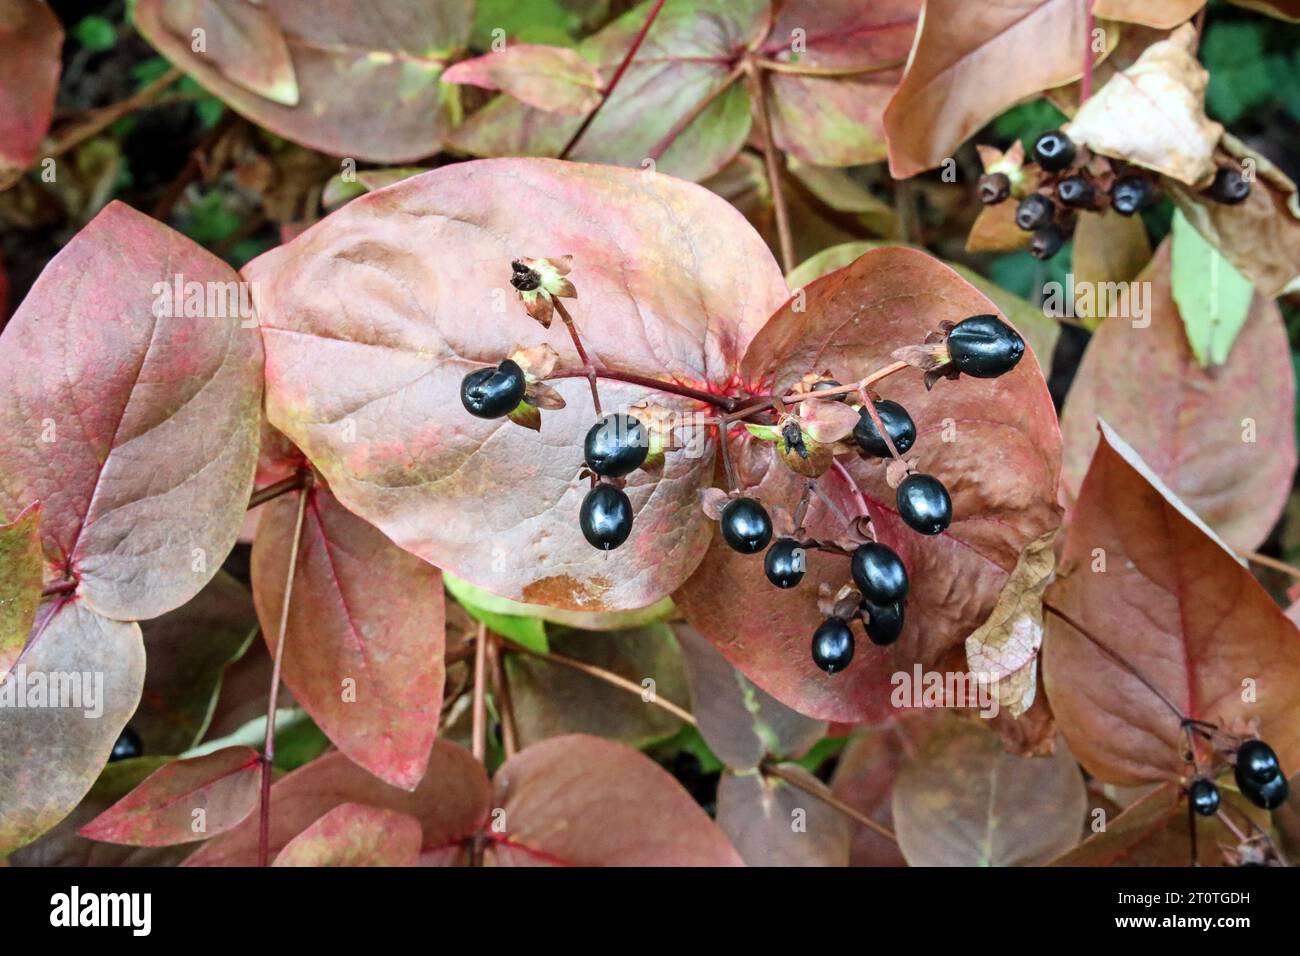 Atropa Belladonna, also known as Deadly Nightshade, the plants leaves turning red early October in the woodlands at Shaugh Bridge, Devon, UK Stock Photo